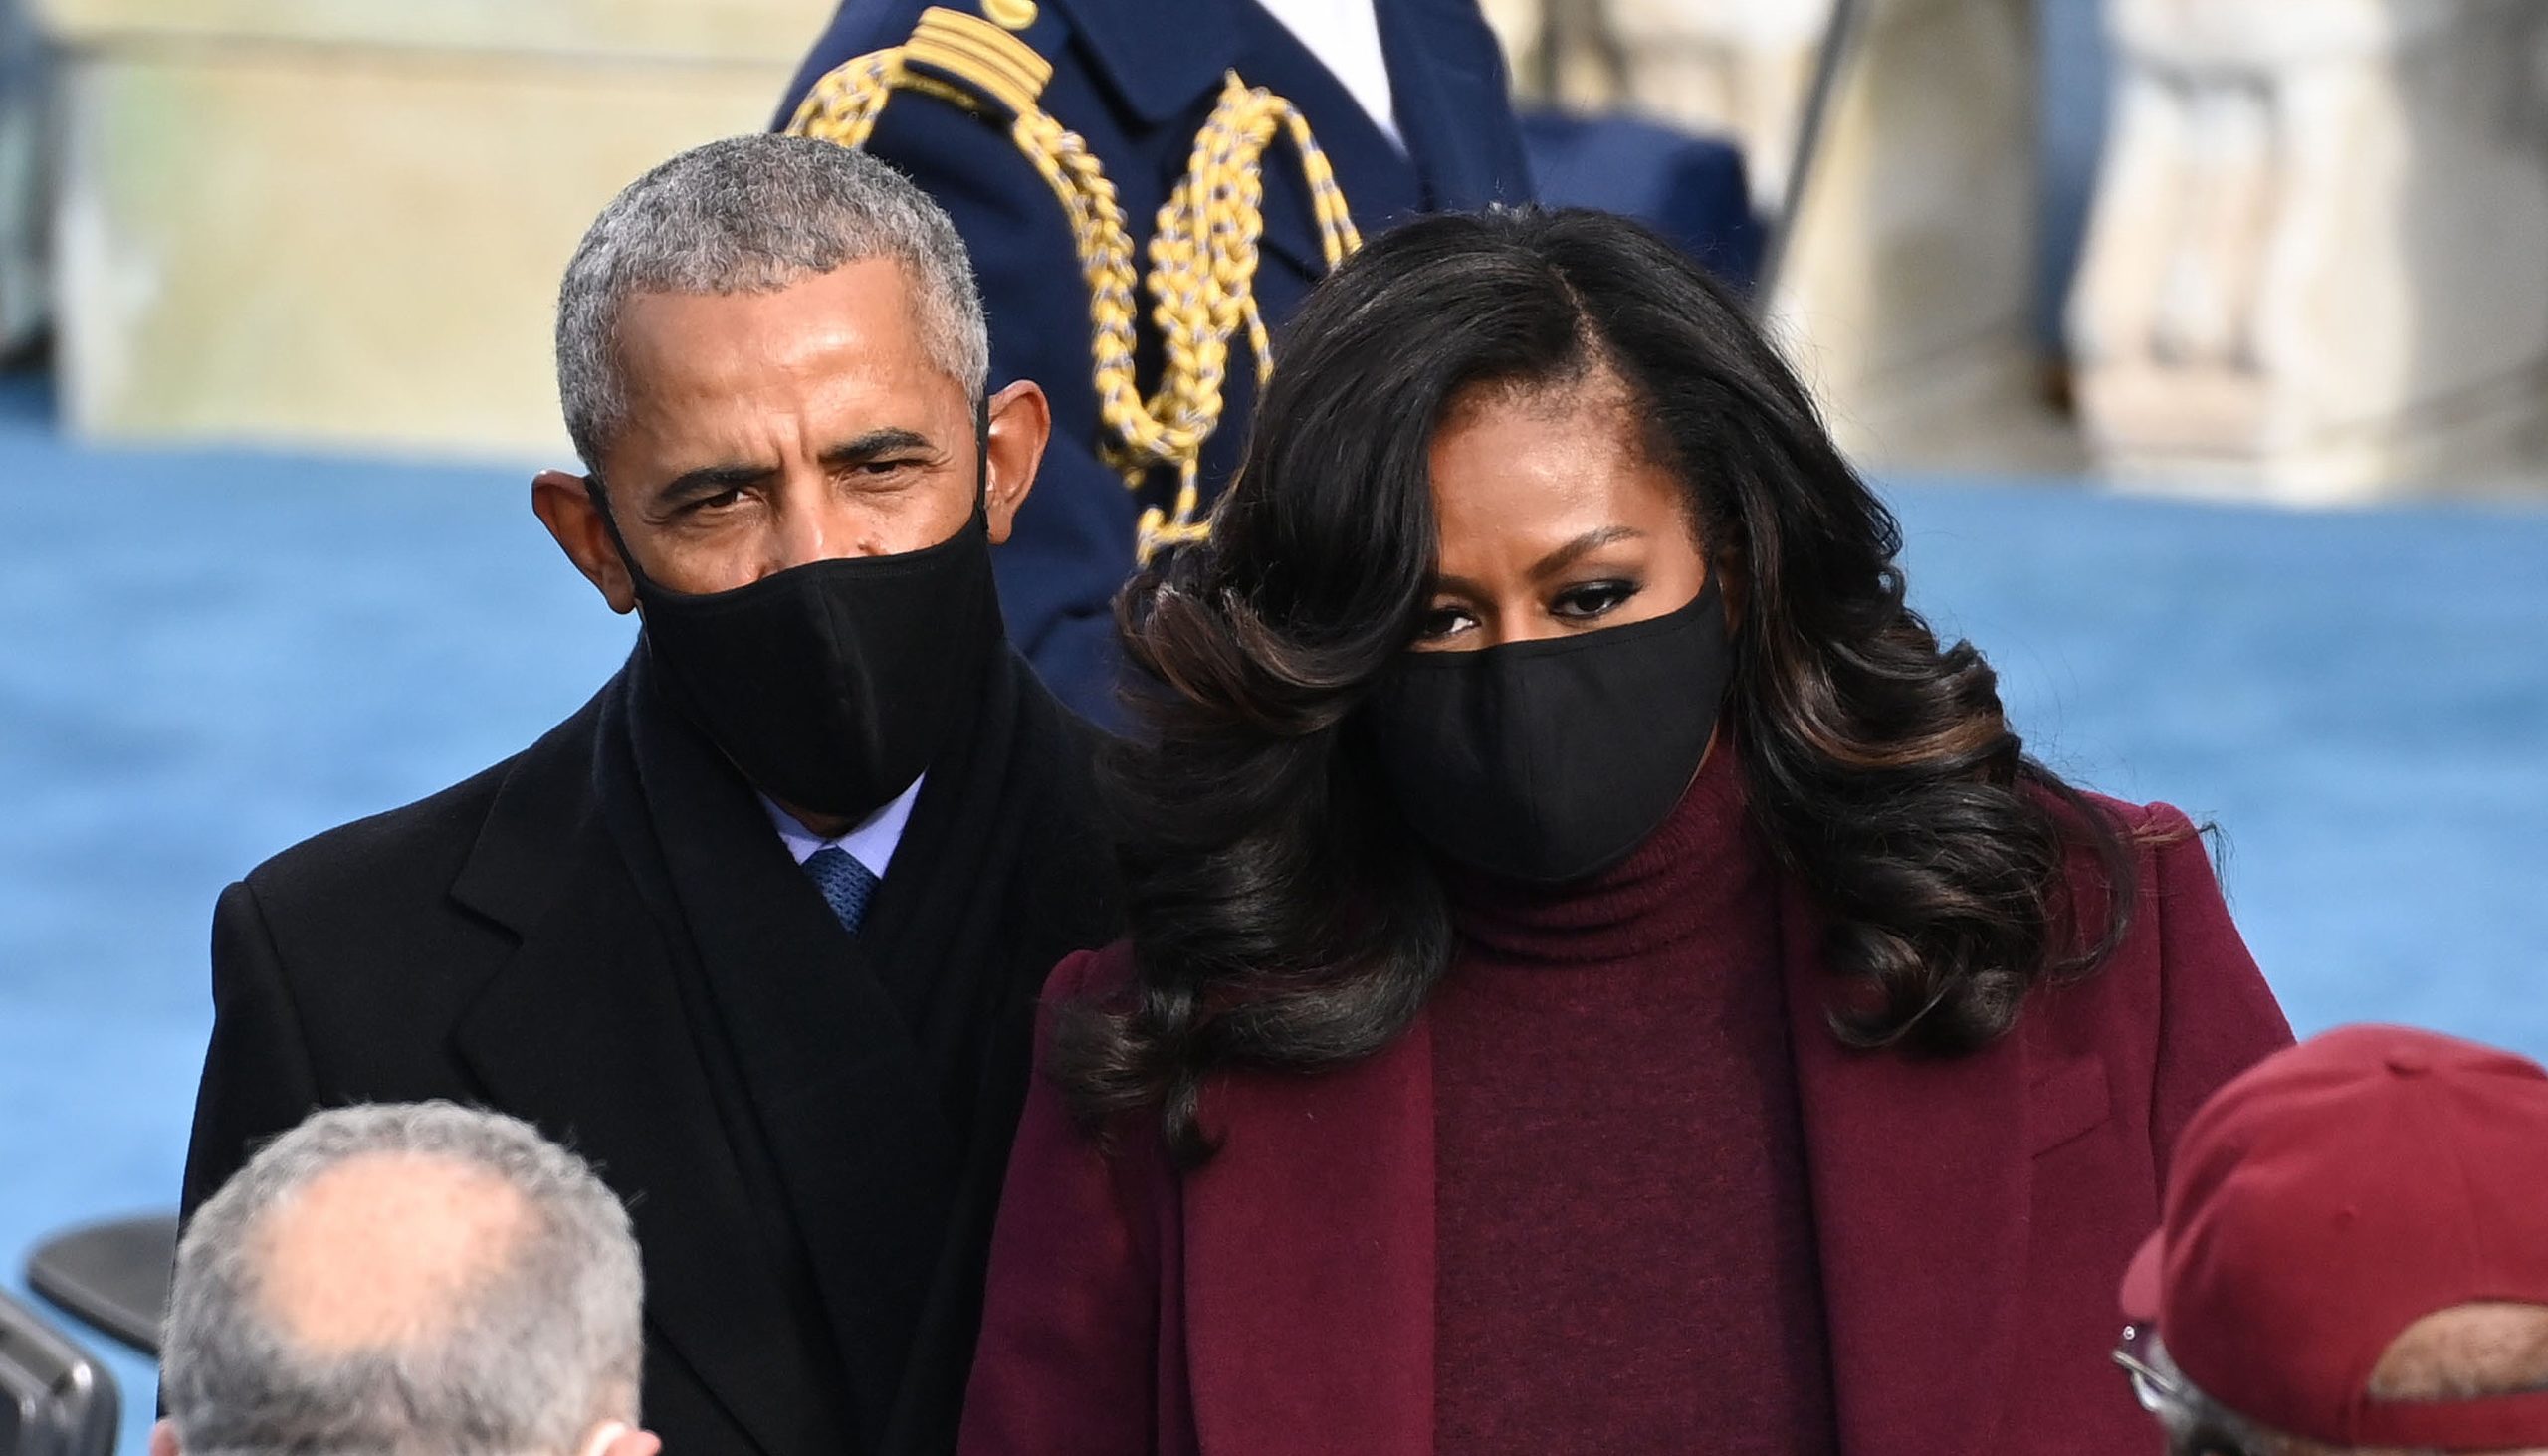 Michelle Obama's Hairstylist Reveals the Technique Behind Those Silky Inauguration Curls